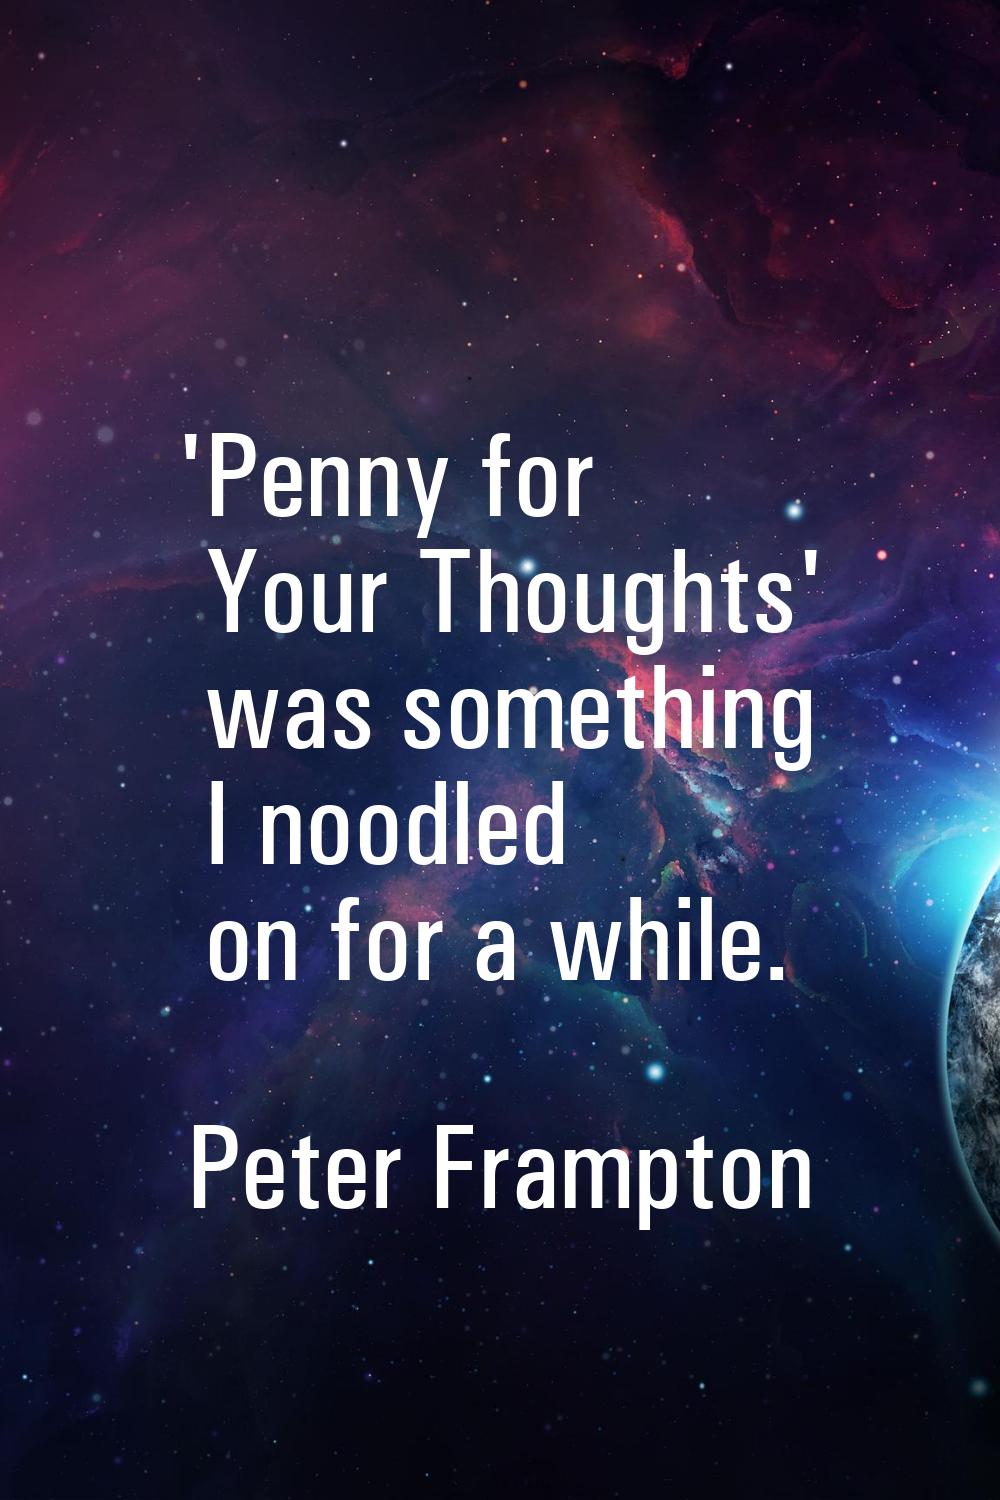 'Penny for Your Thoughts' was something I noodled on for a while.